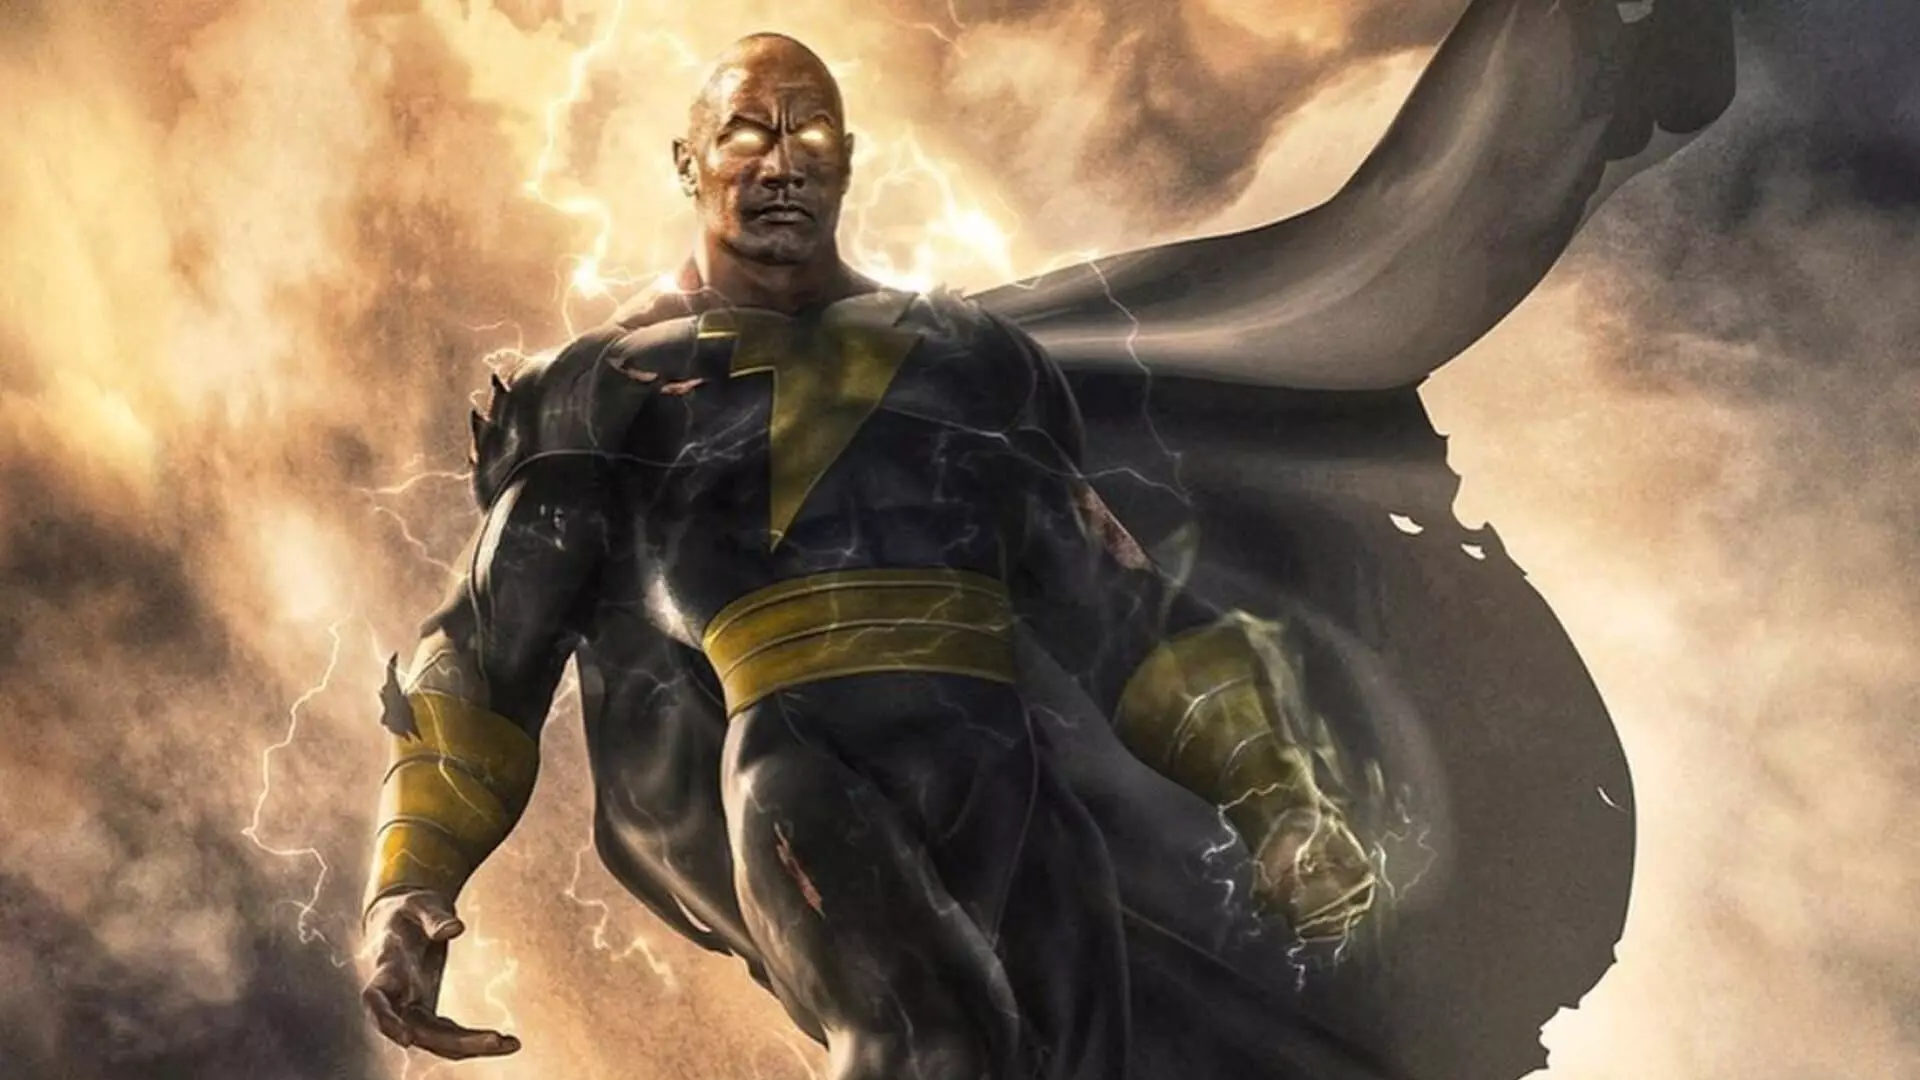 How to watch Black Adam for free